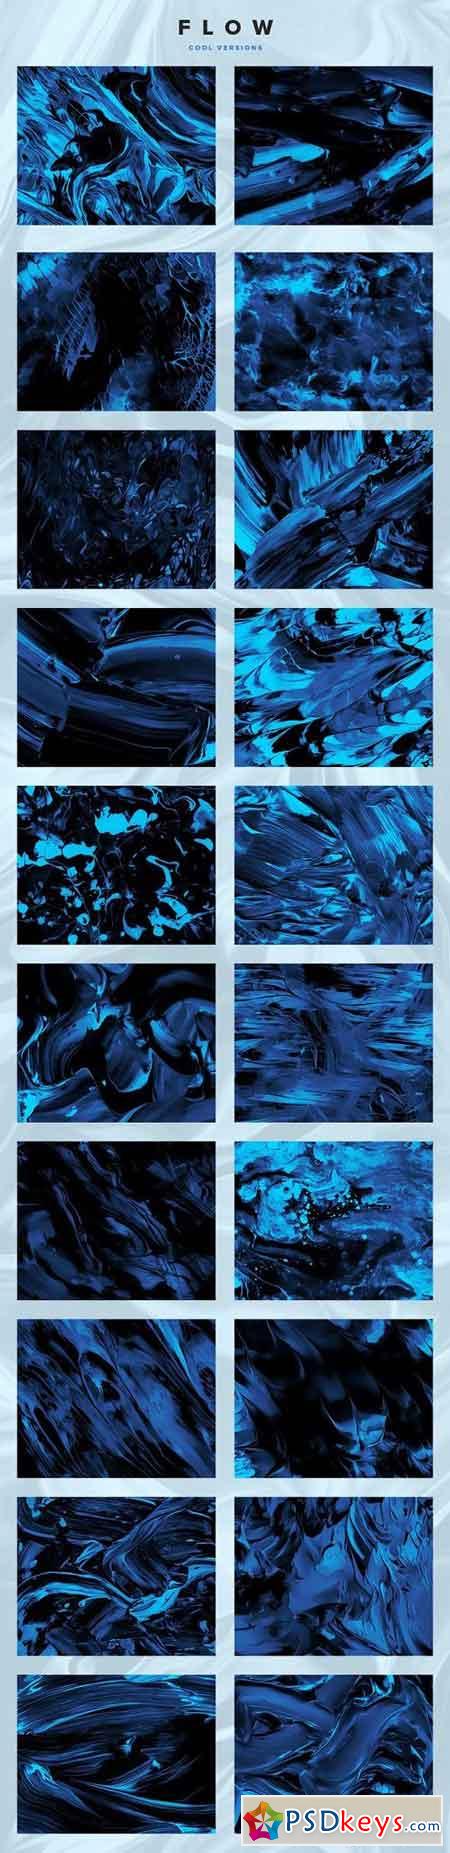 Flow 100 fluid abstract paintings 1631334